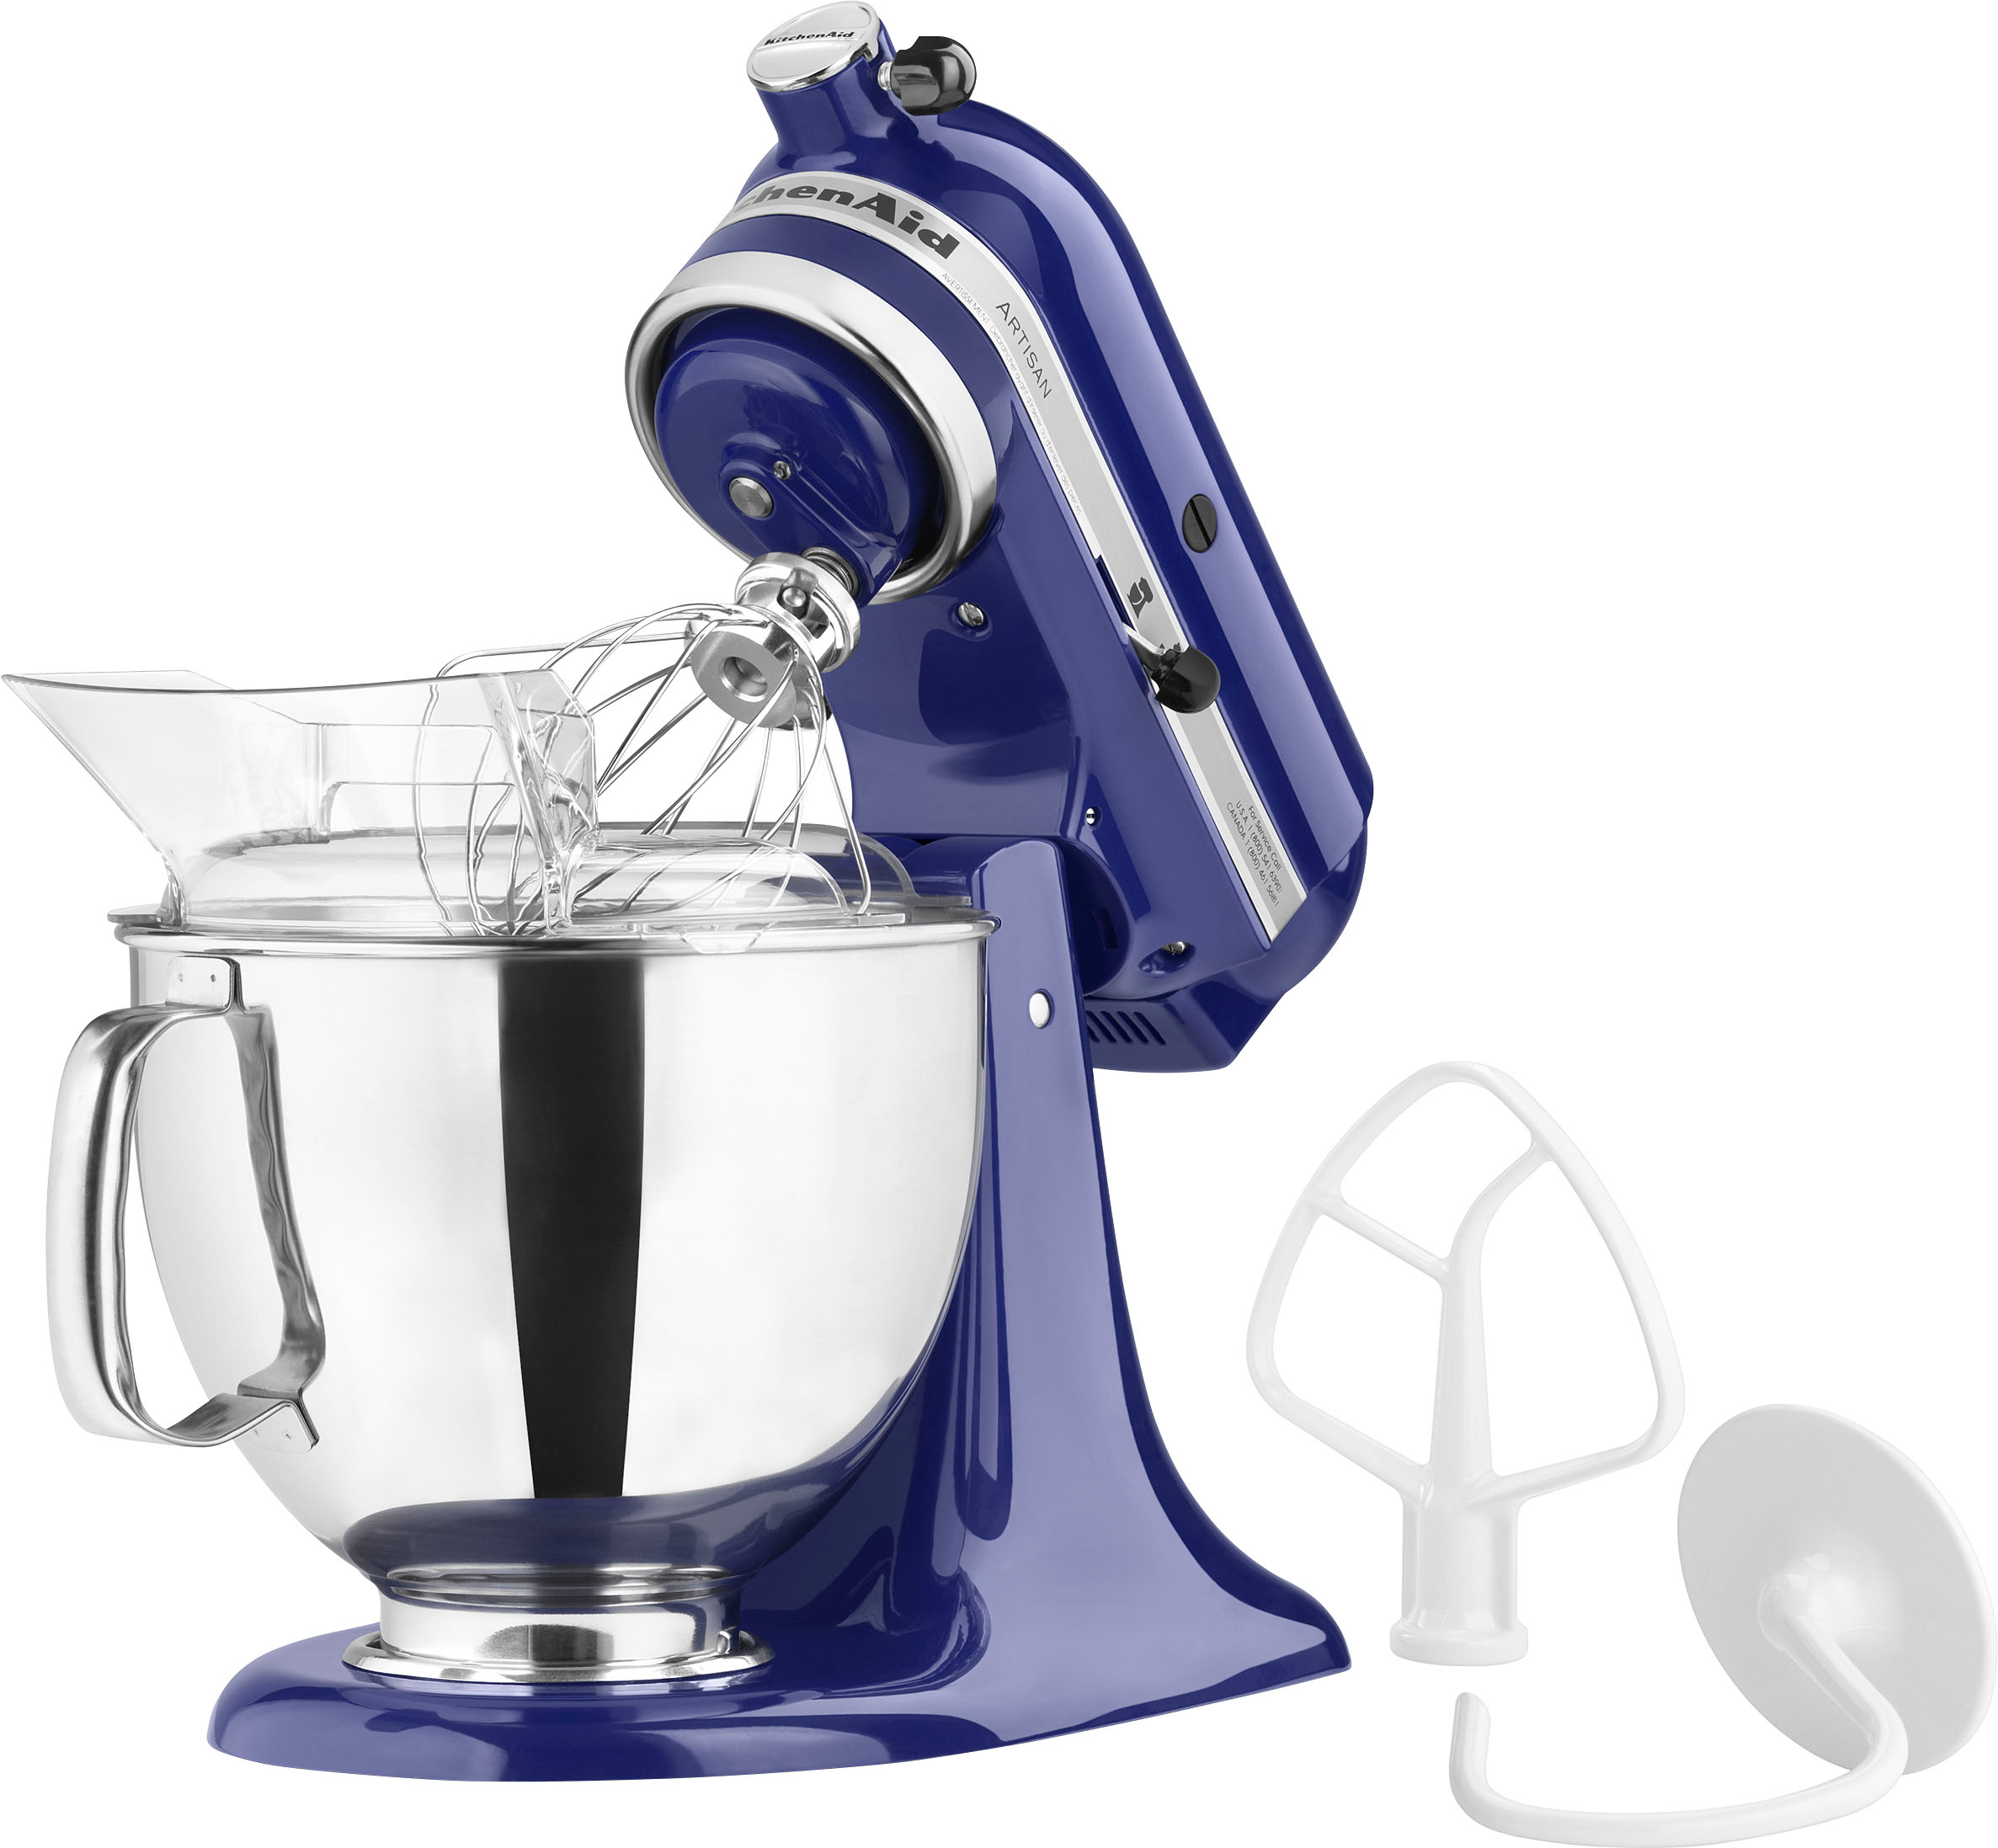 Kitchenaid Mixers for sale in Cub Run, Kentucky